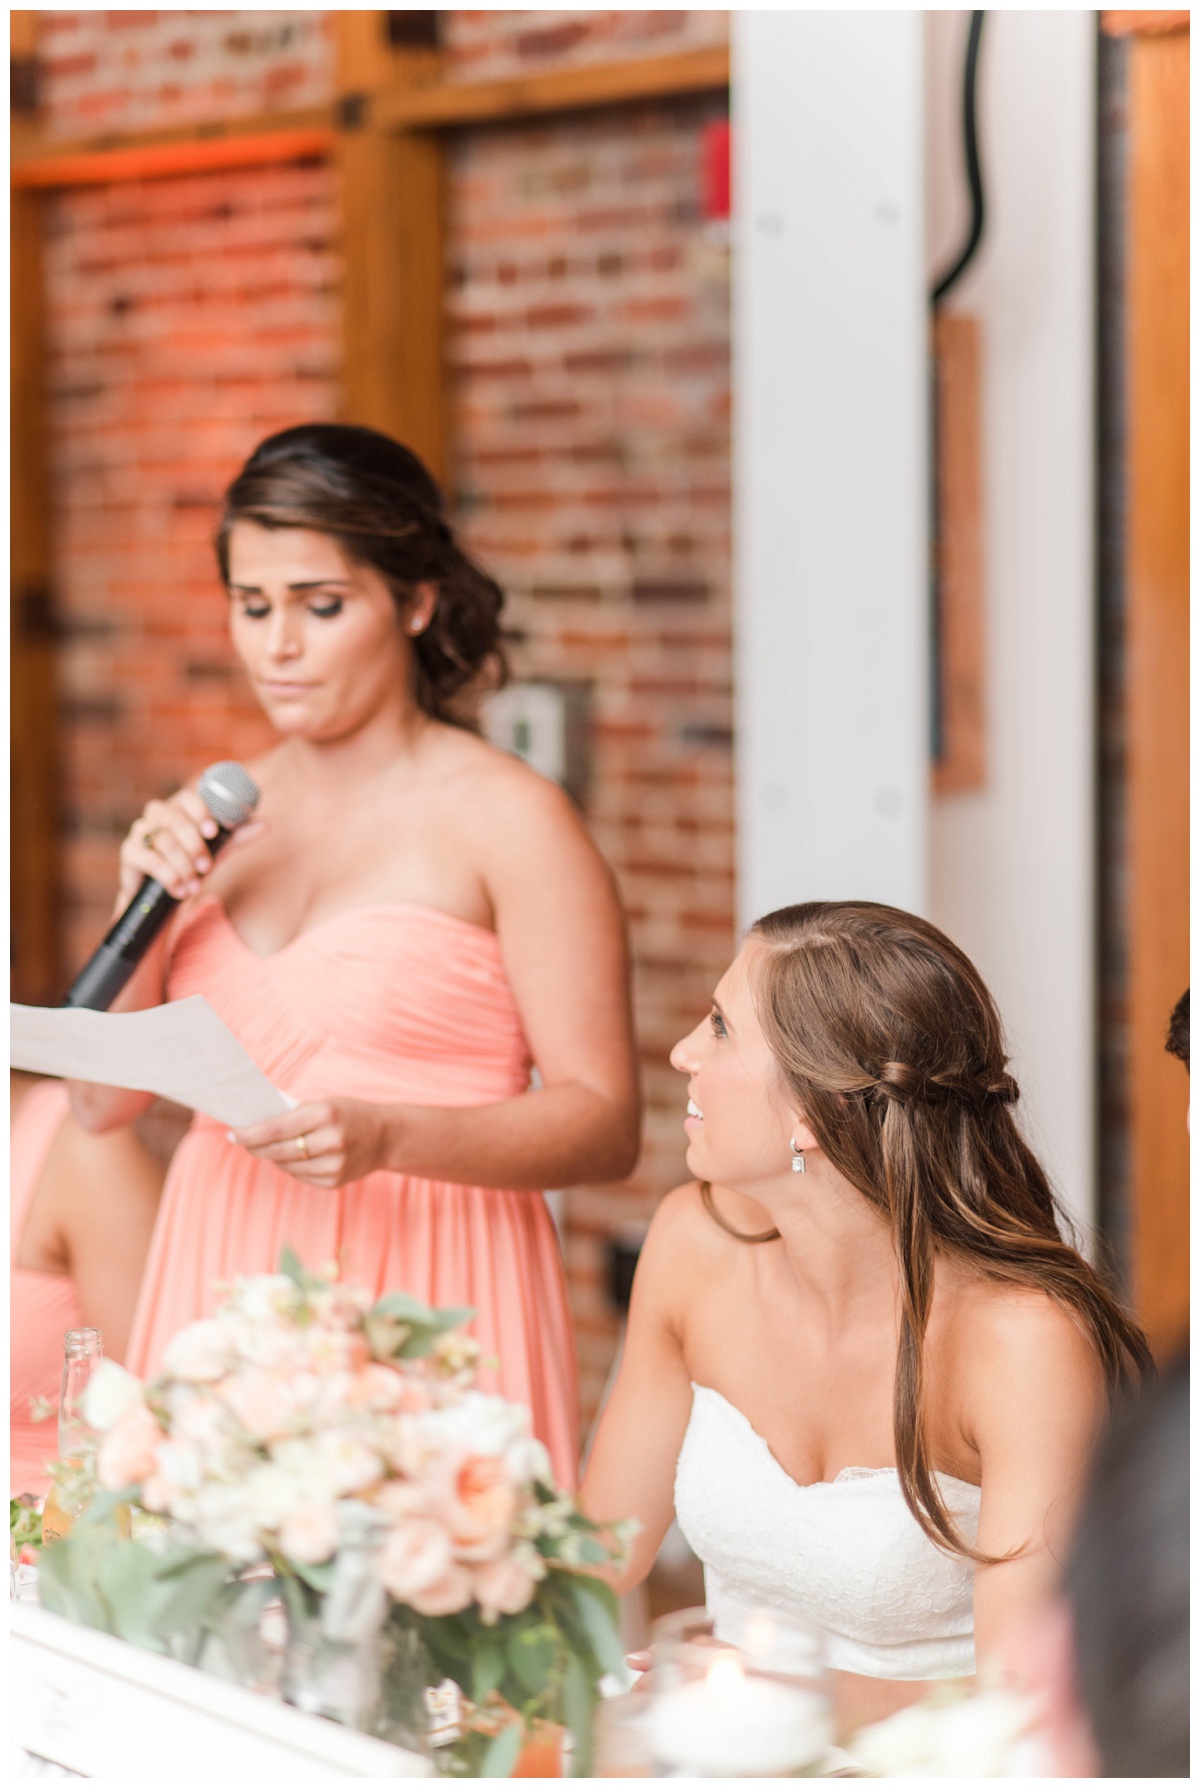 american visionary art museum wedding in baltimore maryland by richmond wedding photographer sarah & dave photography pink coral peach wedding colors summer wedding bridesmaid dress speech cheers reception photo inspiration